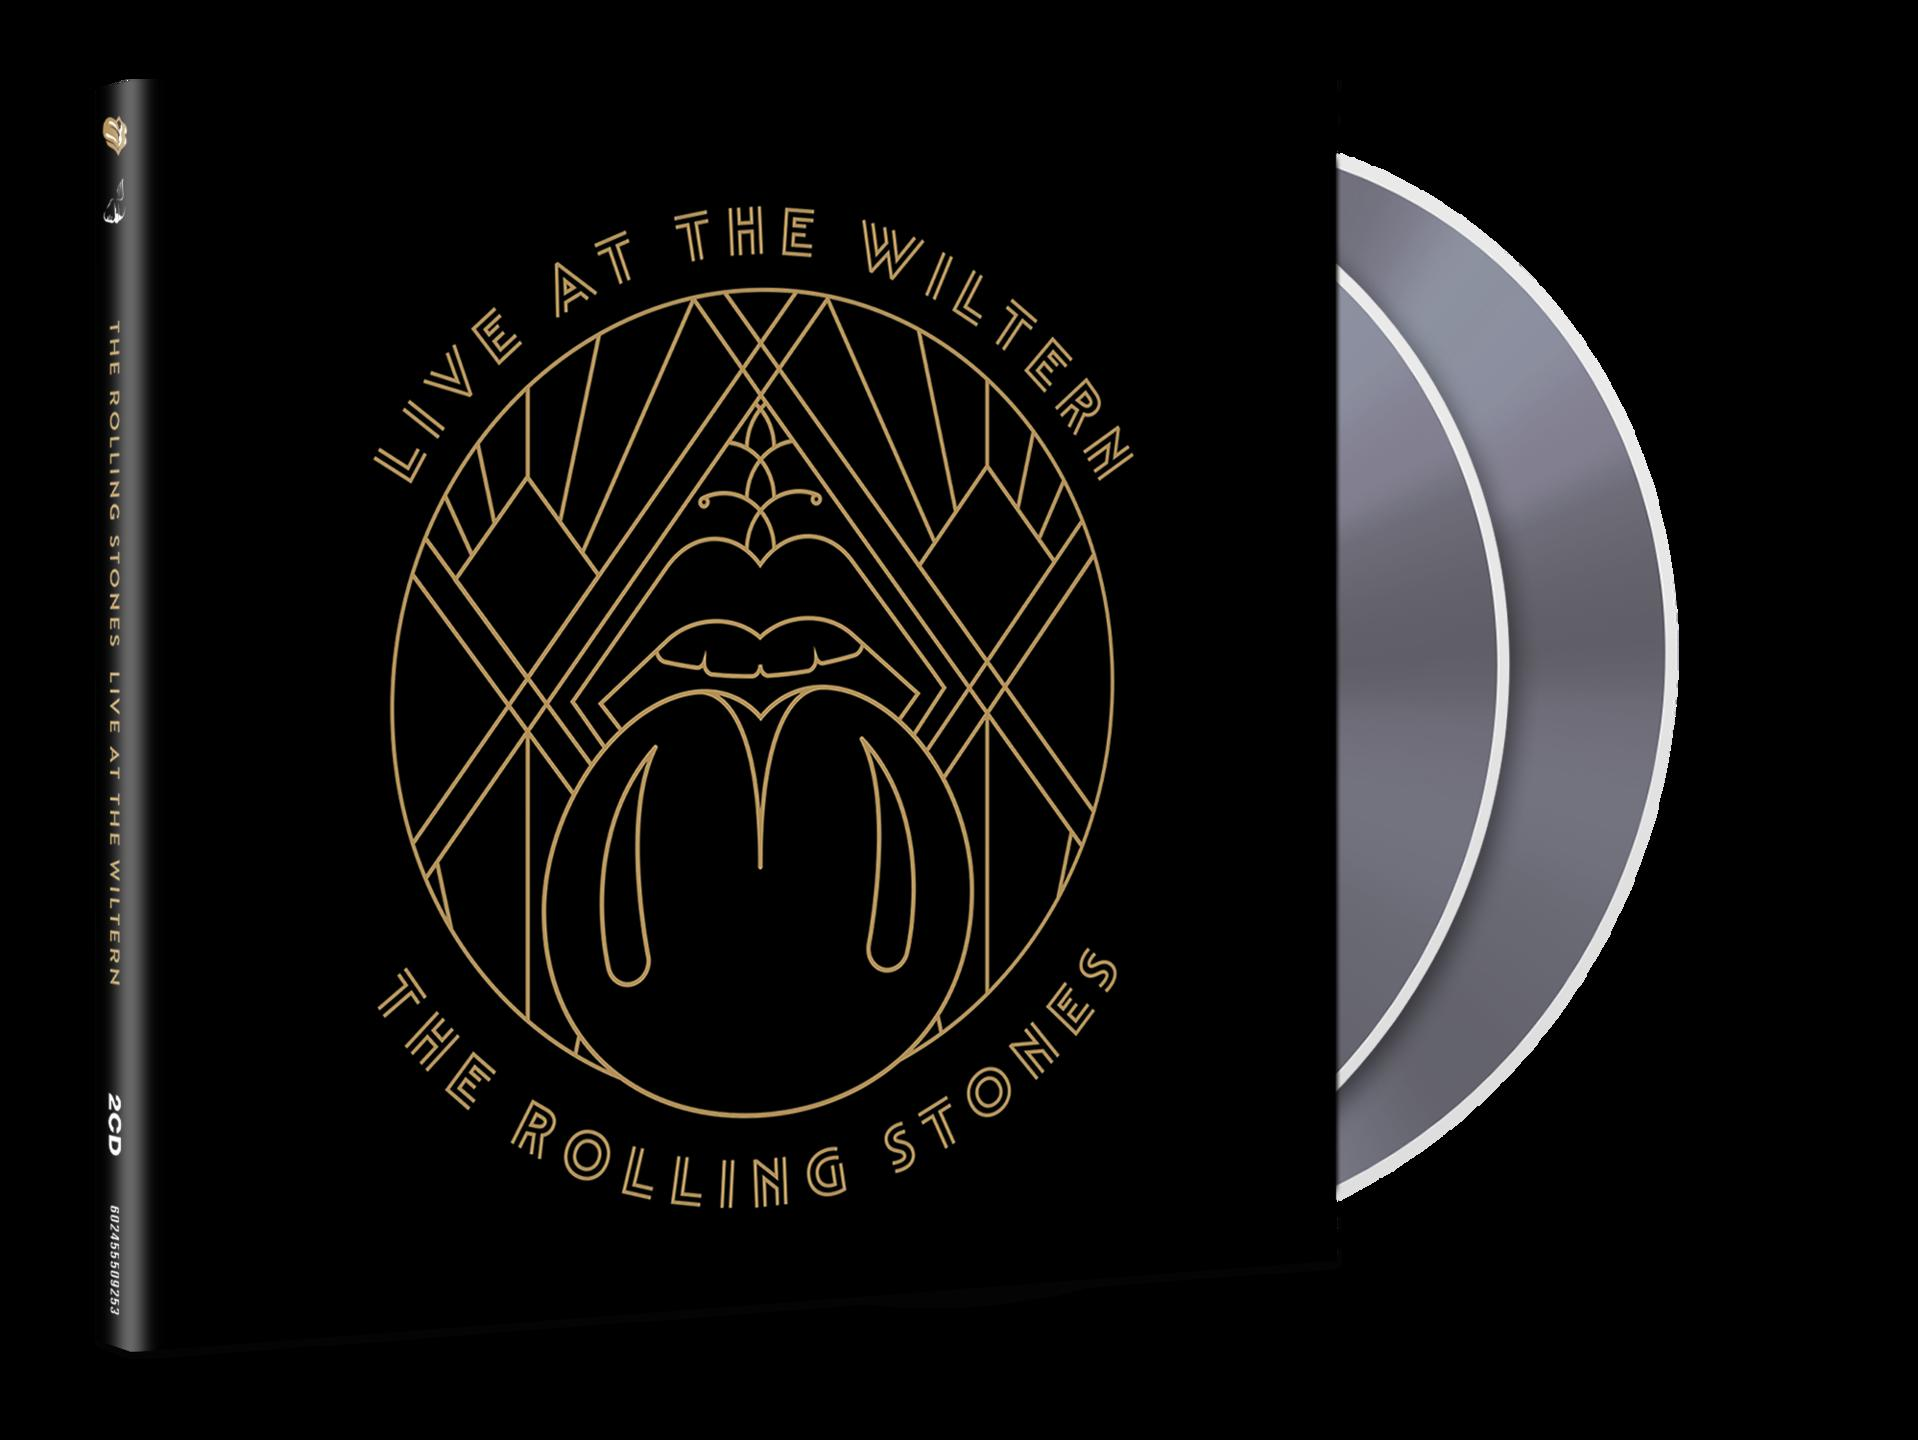 (CD) Live the Angeles Stones - Rolling - (Los Wiltern / at The 2CD)